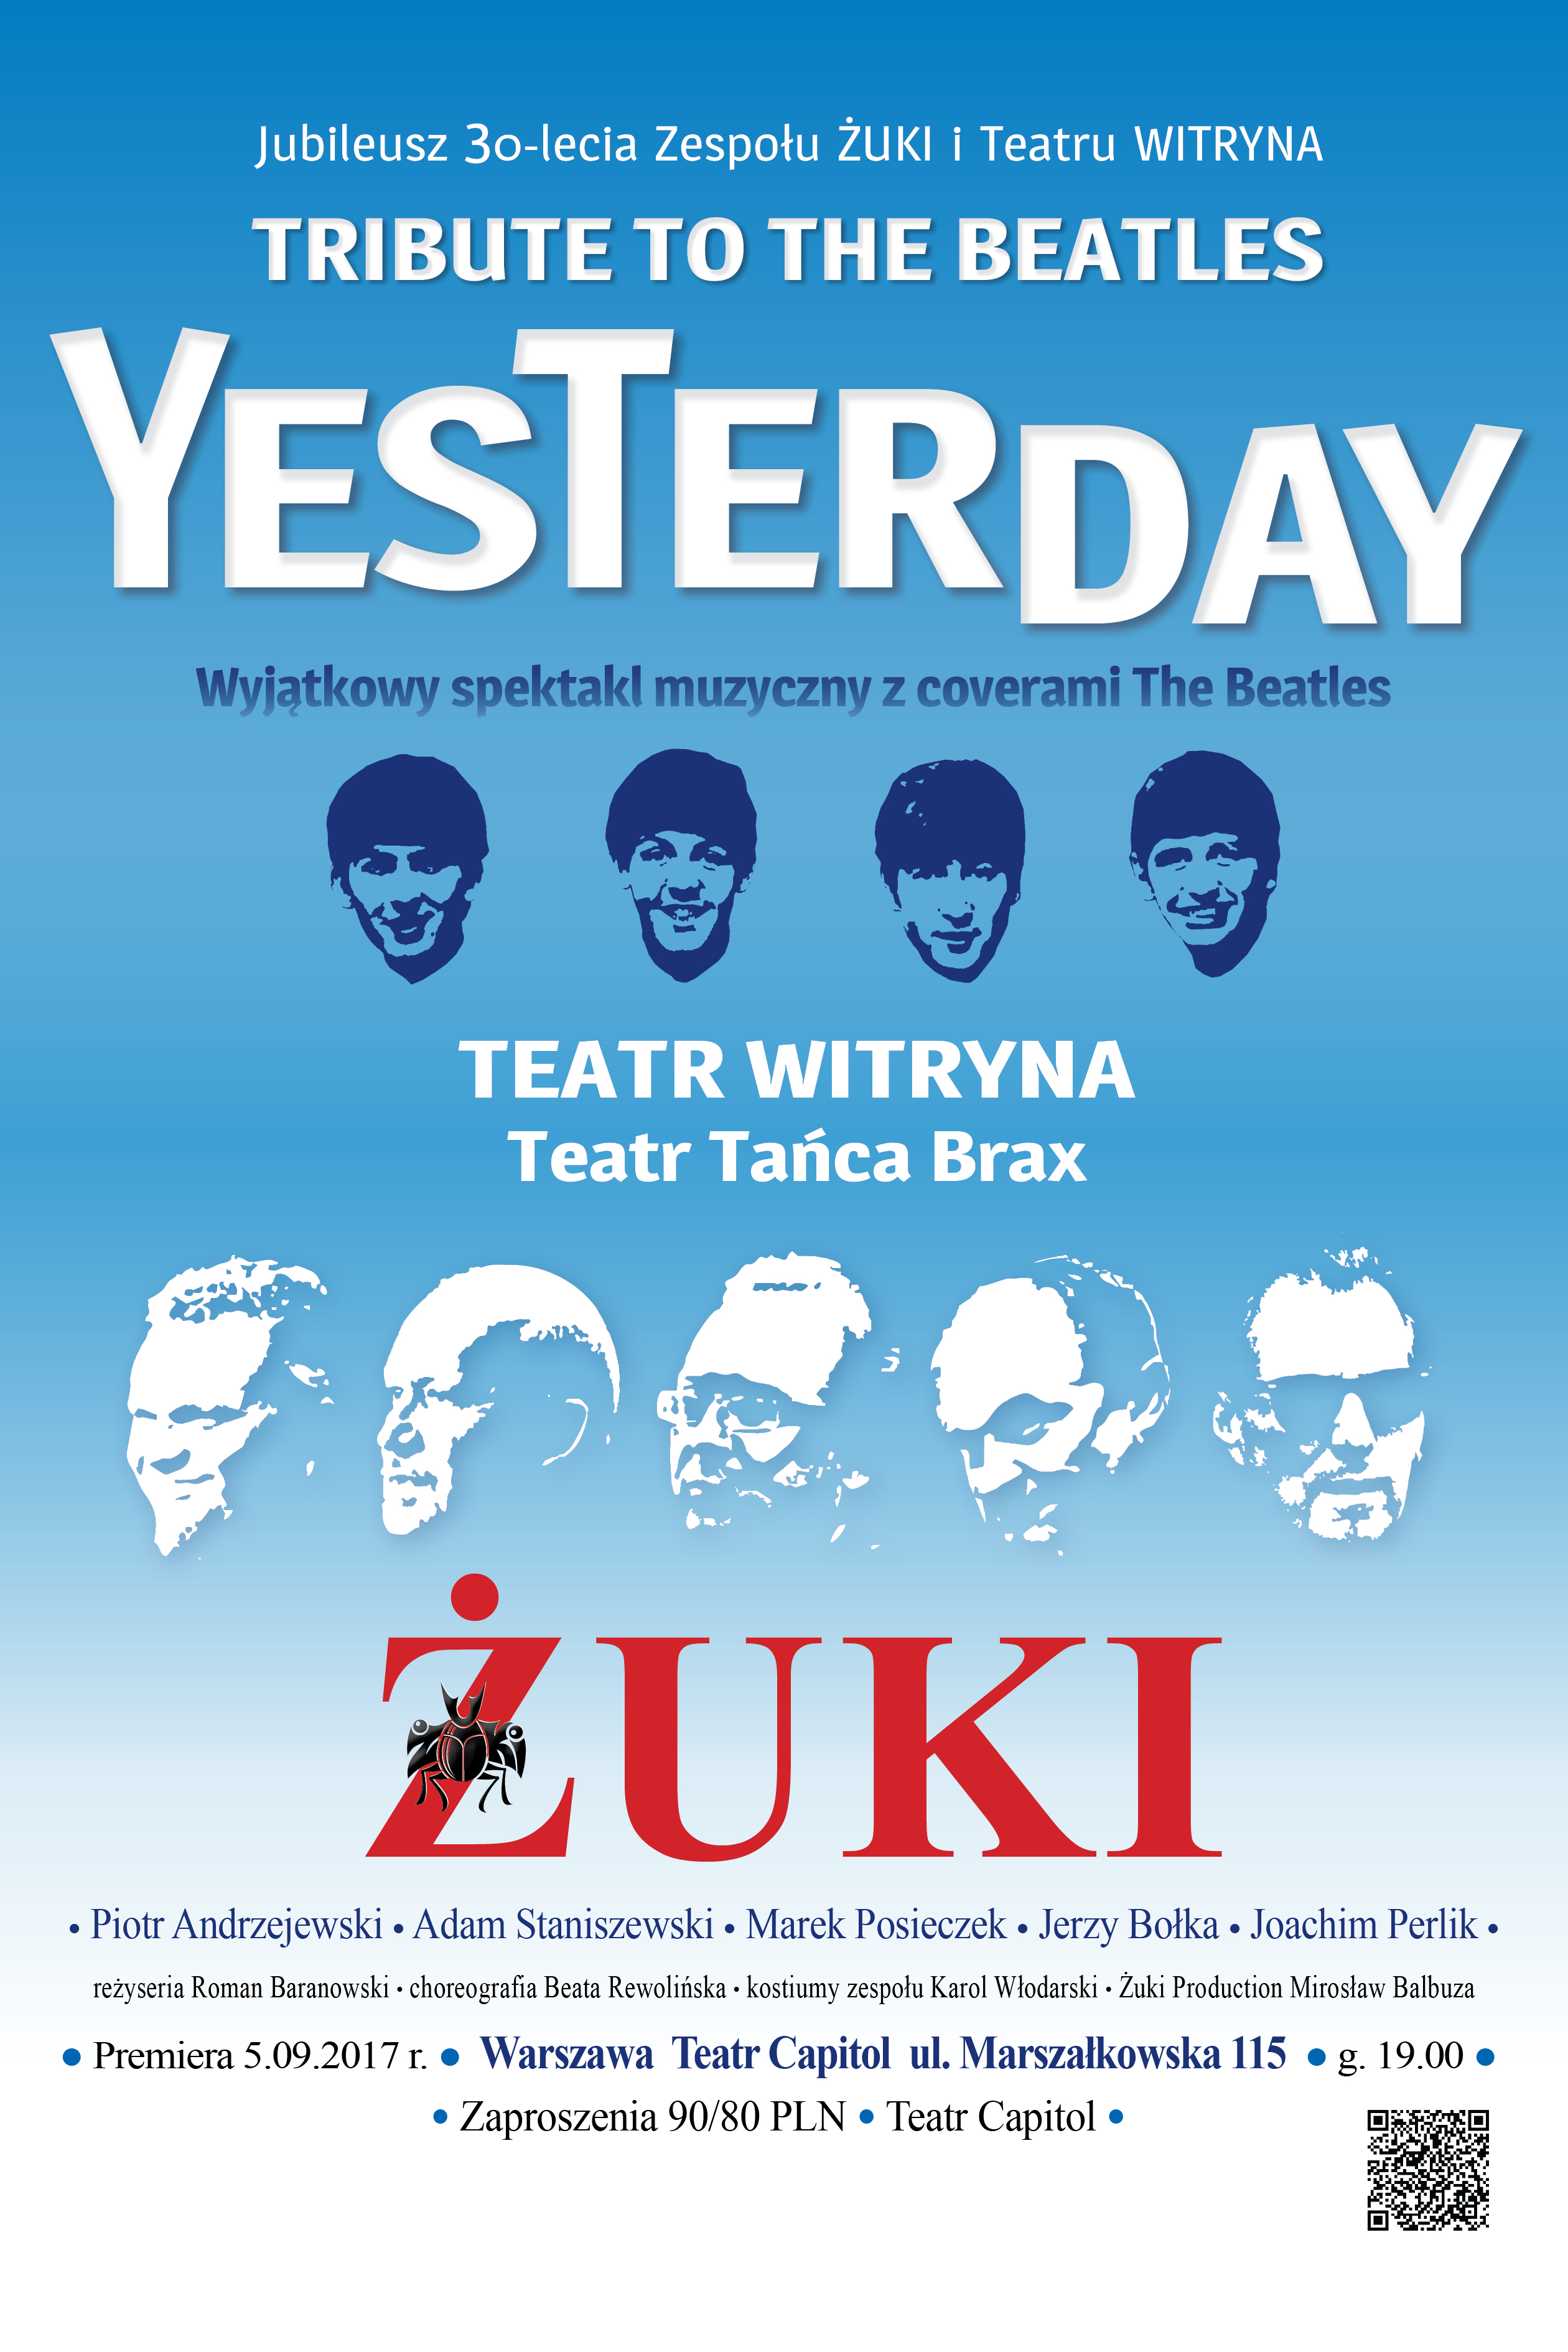 http://teatrcapitol.pl/wp-content/uploads/2017/07/Plakat-YESTERDAY-2017-320x480mm-Capitol.jpg
https://scontent-waw1-1.xx.fbcdn.net/v/t31.0-8/20507293_1769917346368941_6030993859842444663_o.jpg?oh=7f0ebfbc9cbf110f482bb105941d4add&oe=5A2CFE45